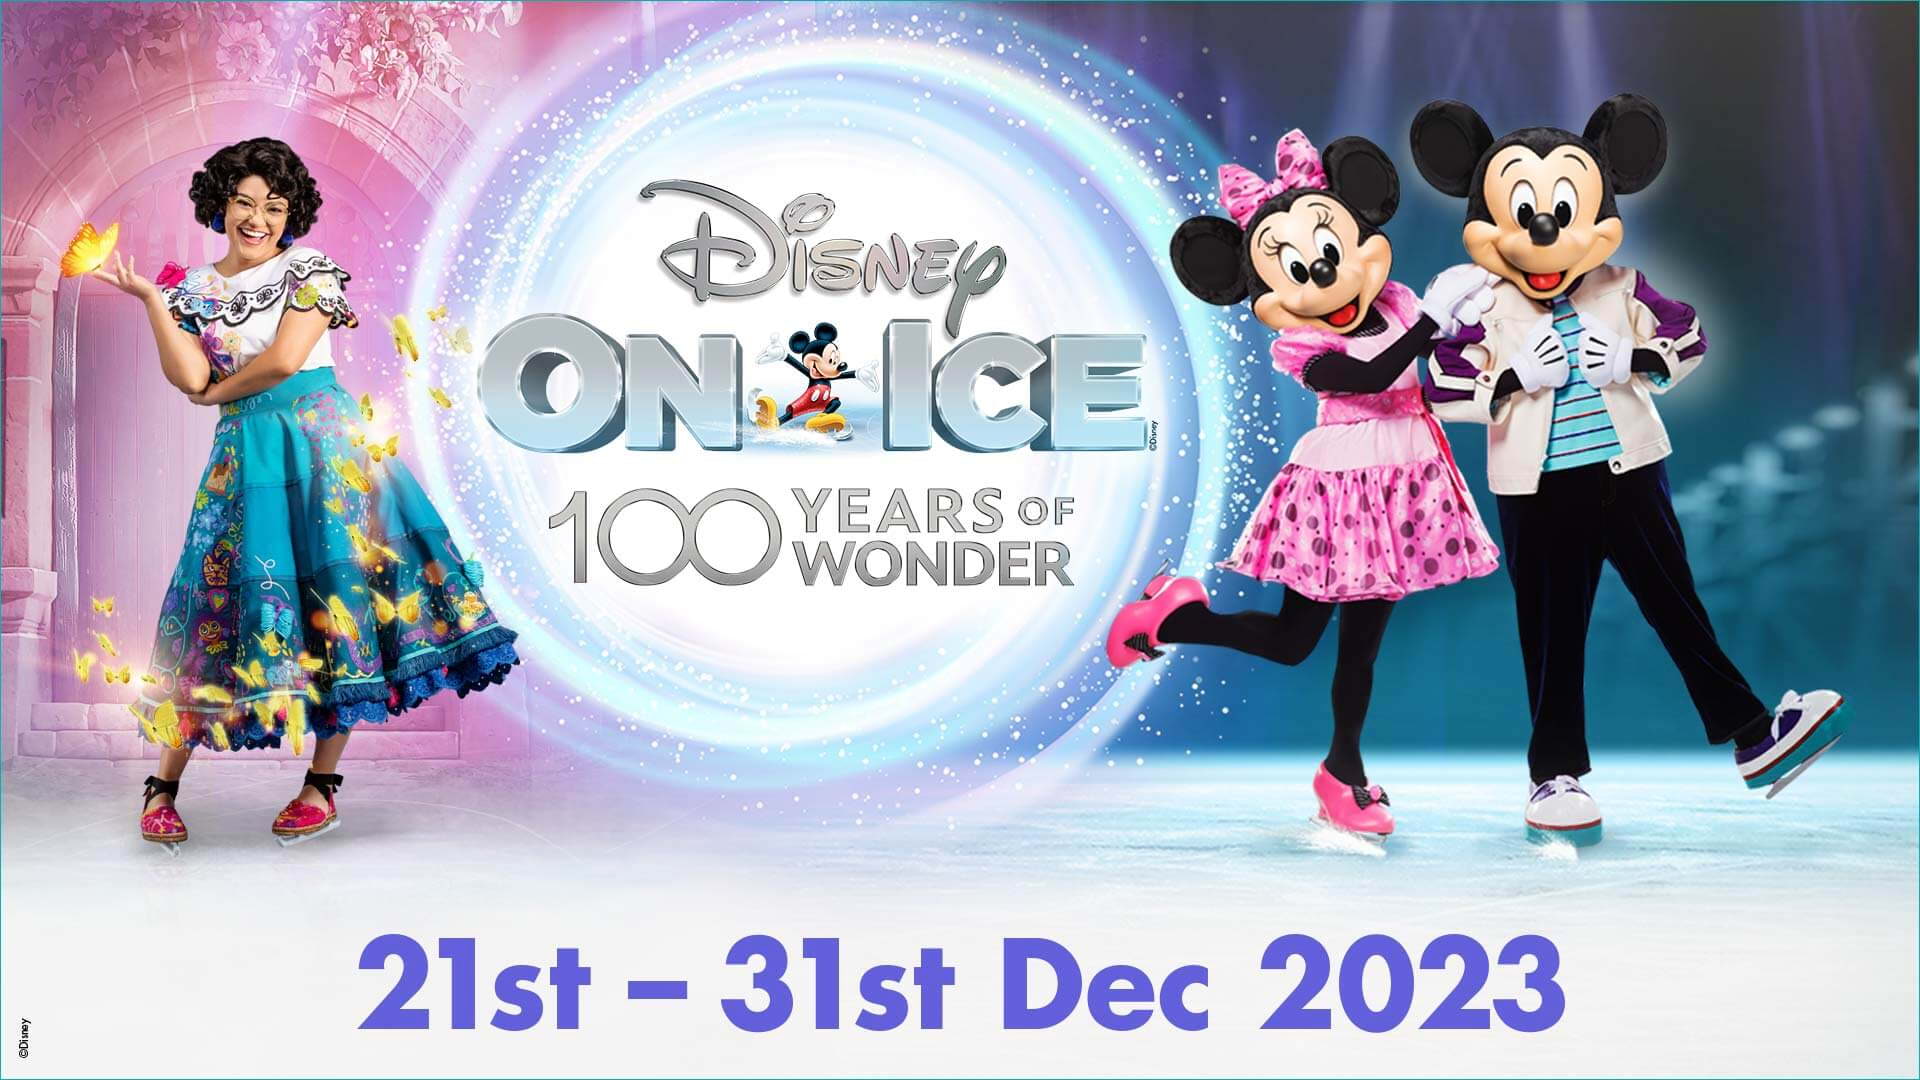 Join Disney for a trip through 100 Years of Wonder